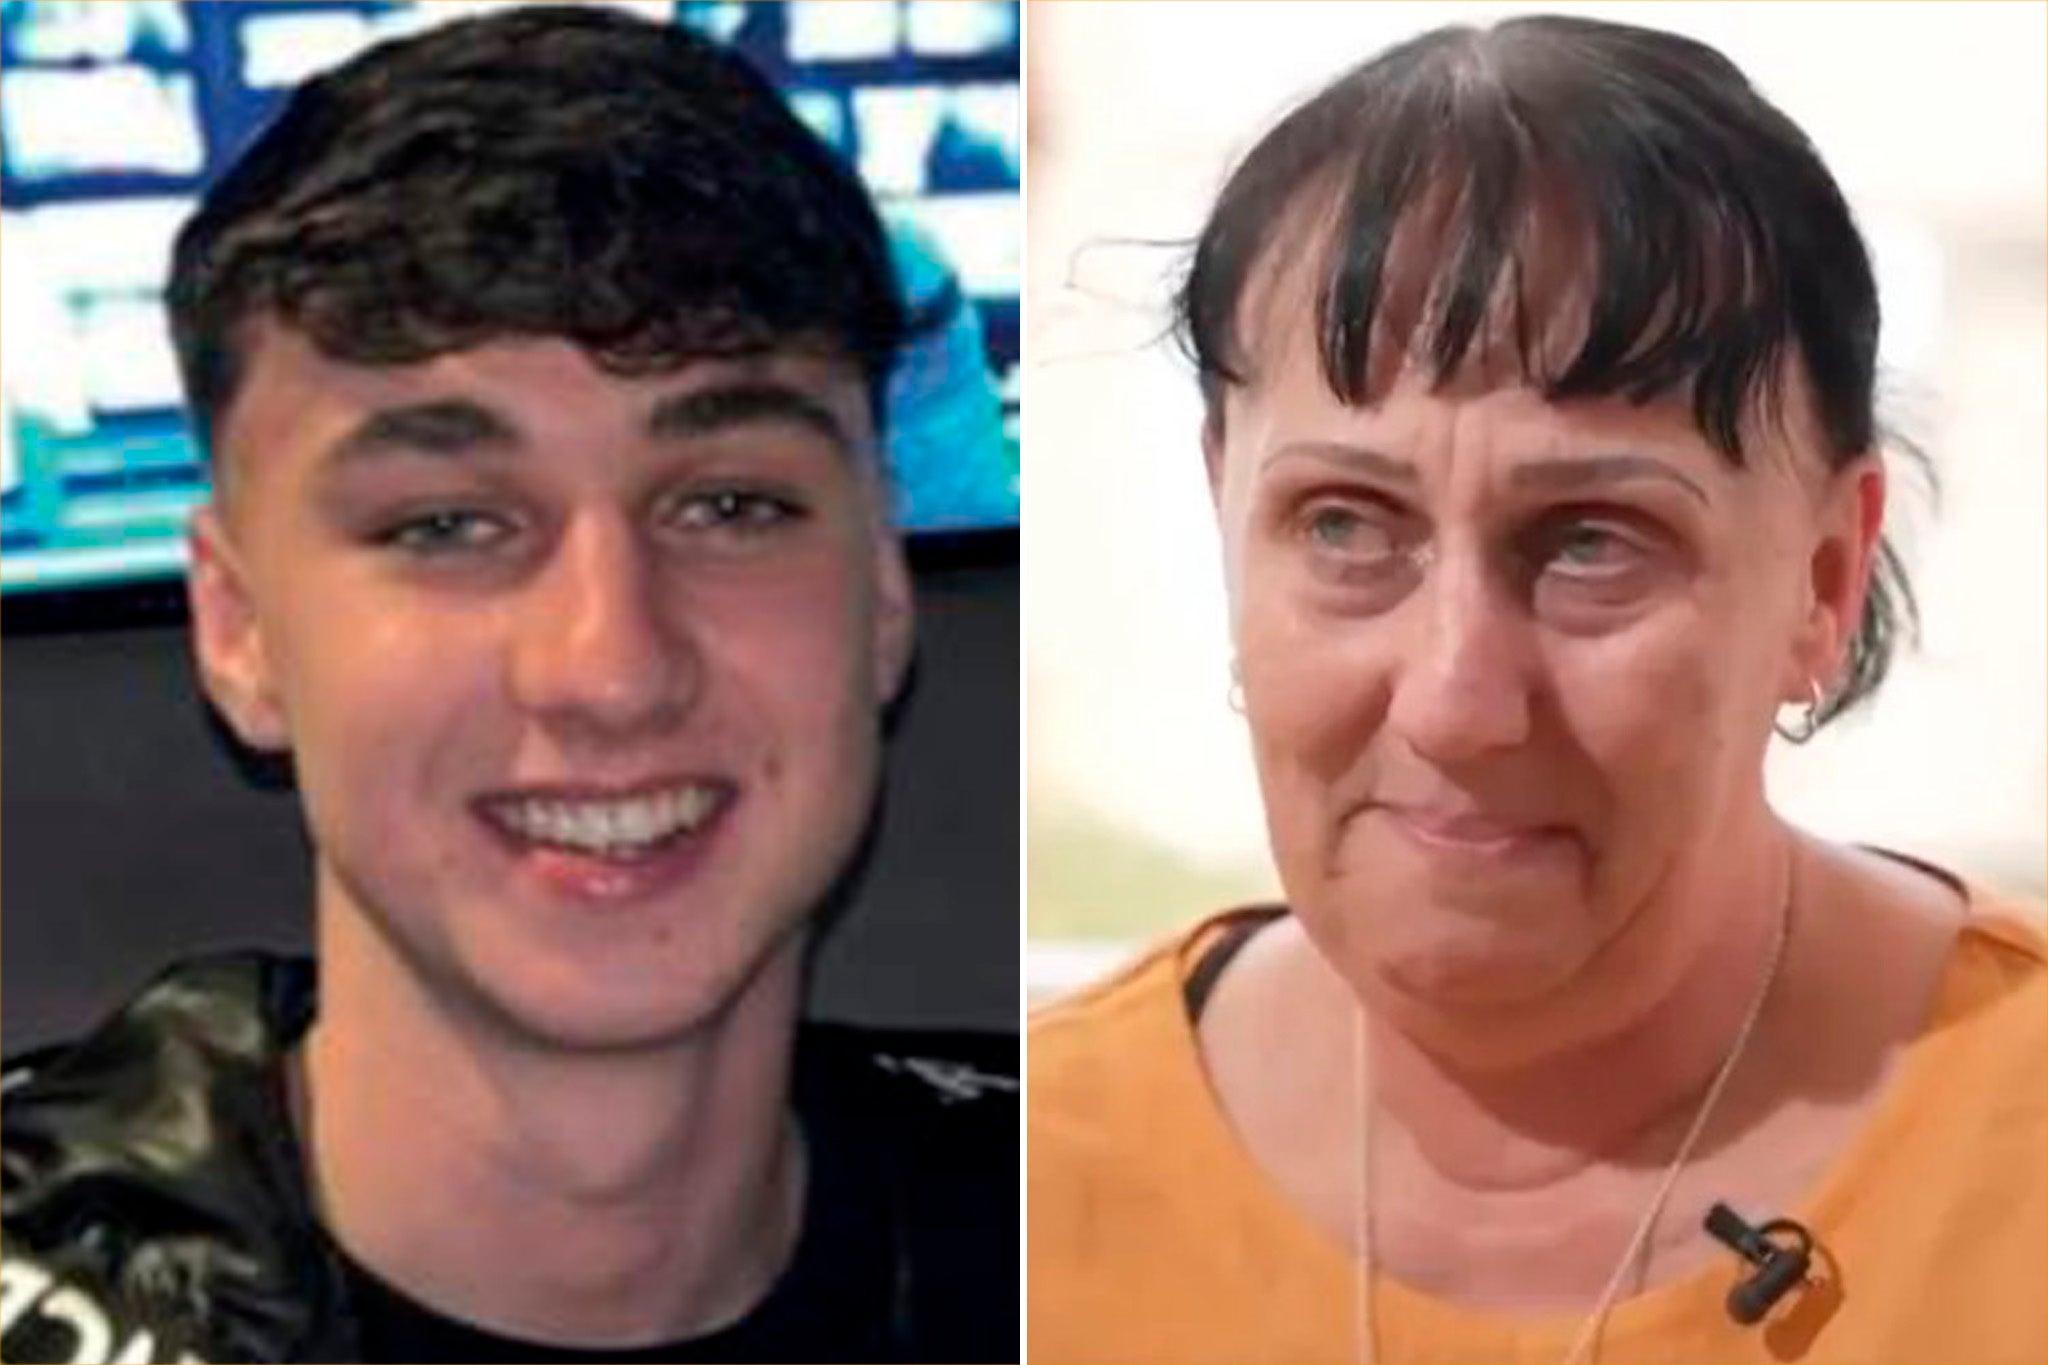 Jay Slater’s mother Debbie Duncan, his father Warren Slater and brother Zak have all flown out to the island while they continue searching for the Lancashire teenager.